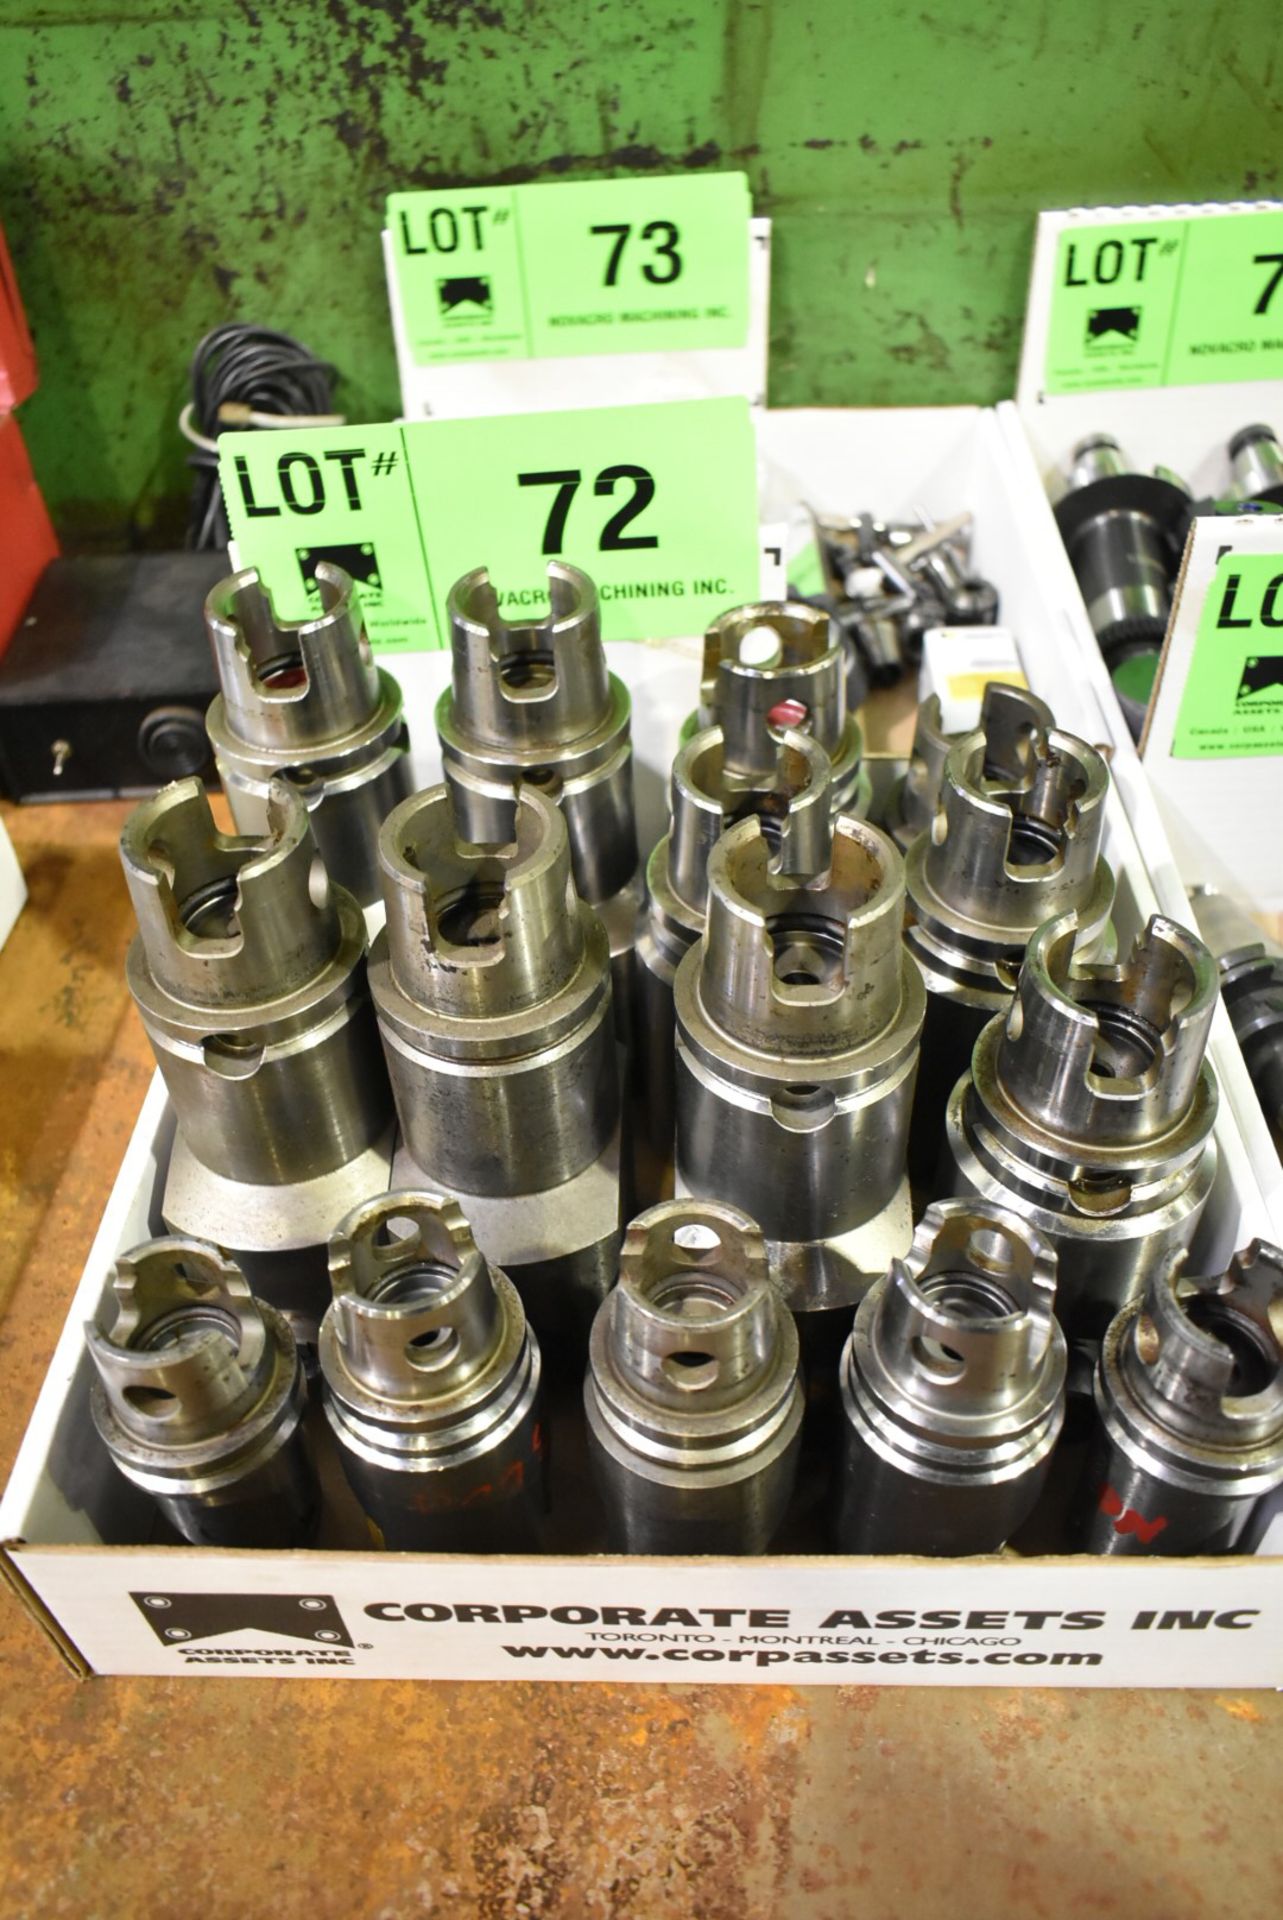 LOT/ (13) HSK TOOL HOLDERS [RIGGING FEE FOR LOT#72 - $25 USD PLUS APPLICABLE TAXES]